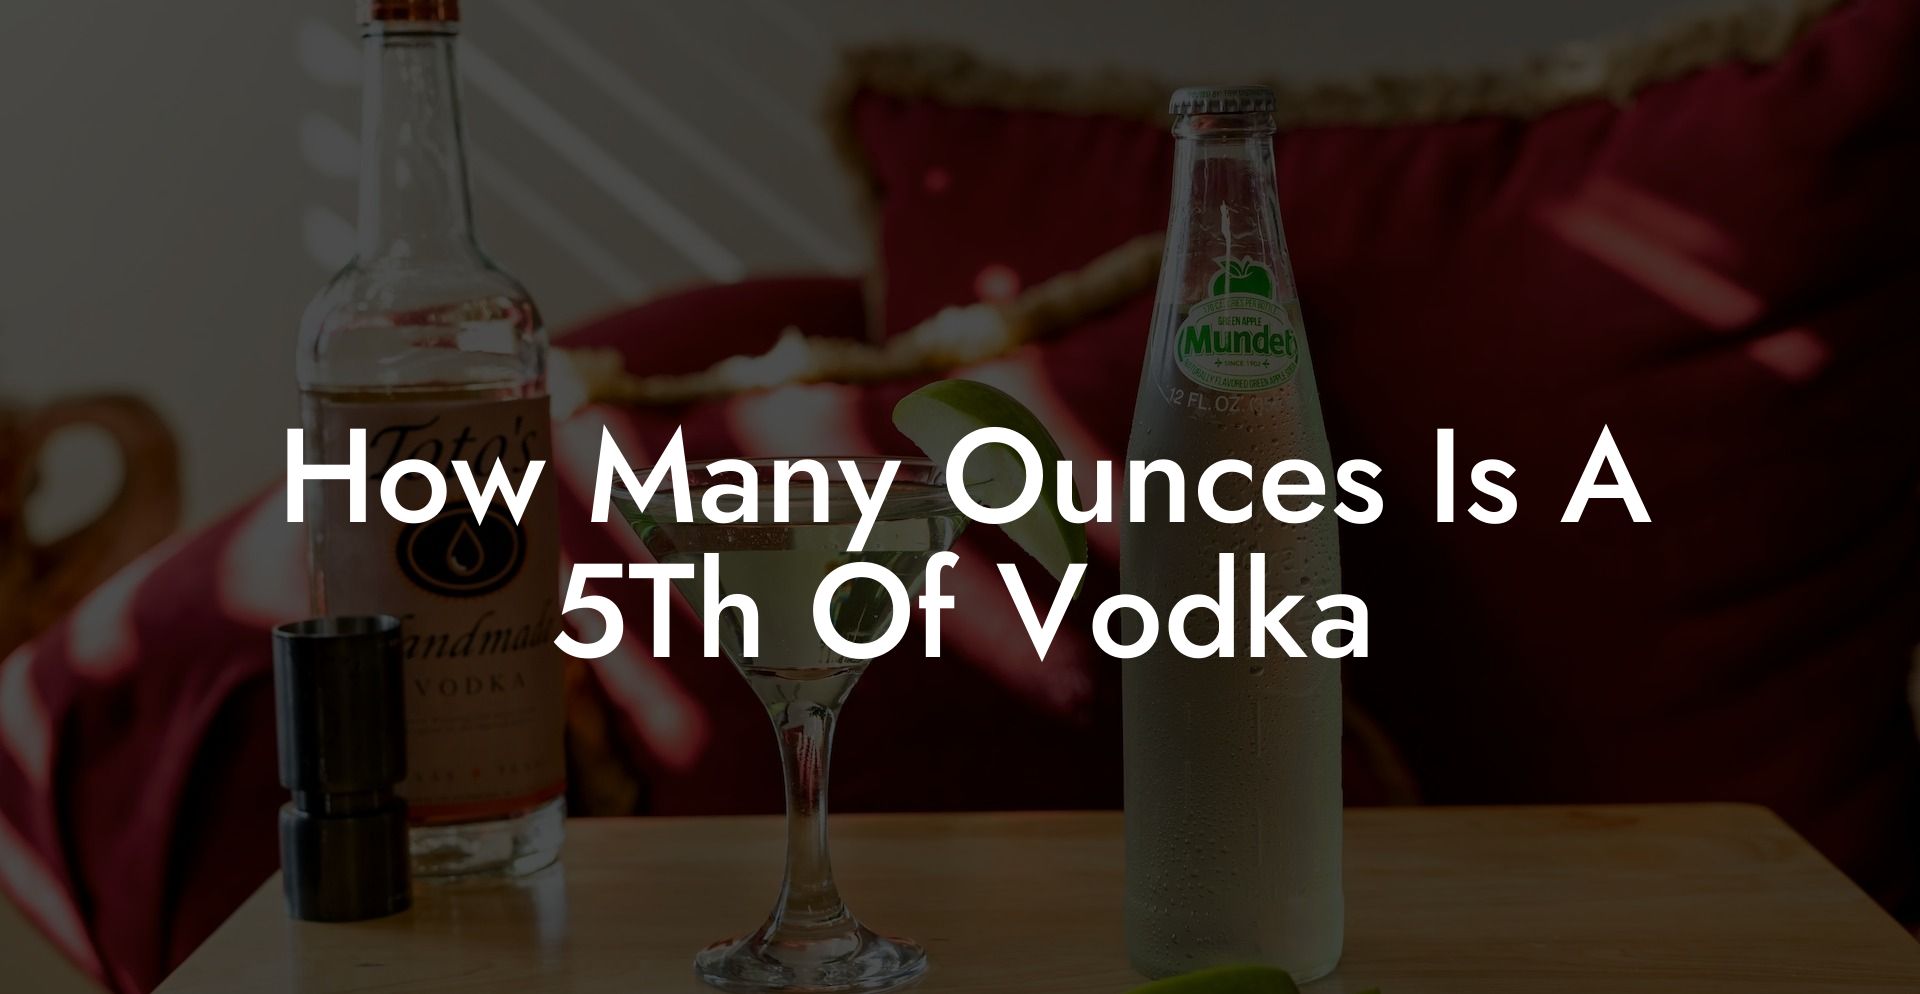 How Many Ounces Is A 5Th Of Vodka